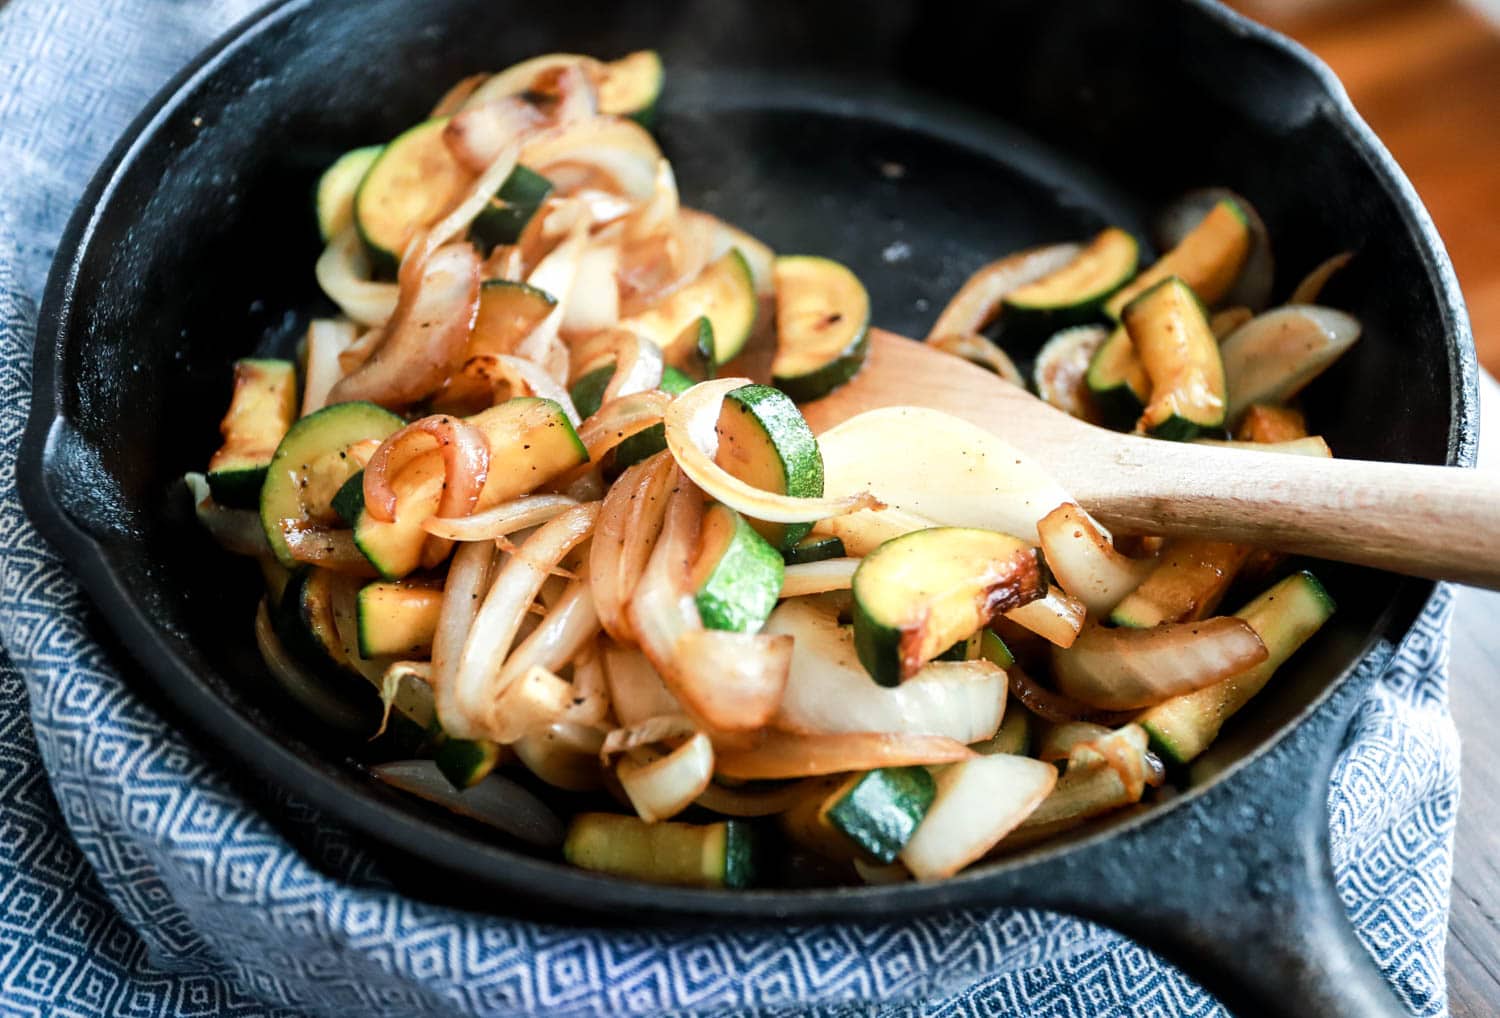 Zucchini and onions in a skillet with blue napkin on the outside.